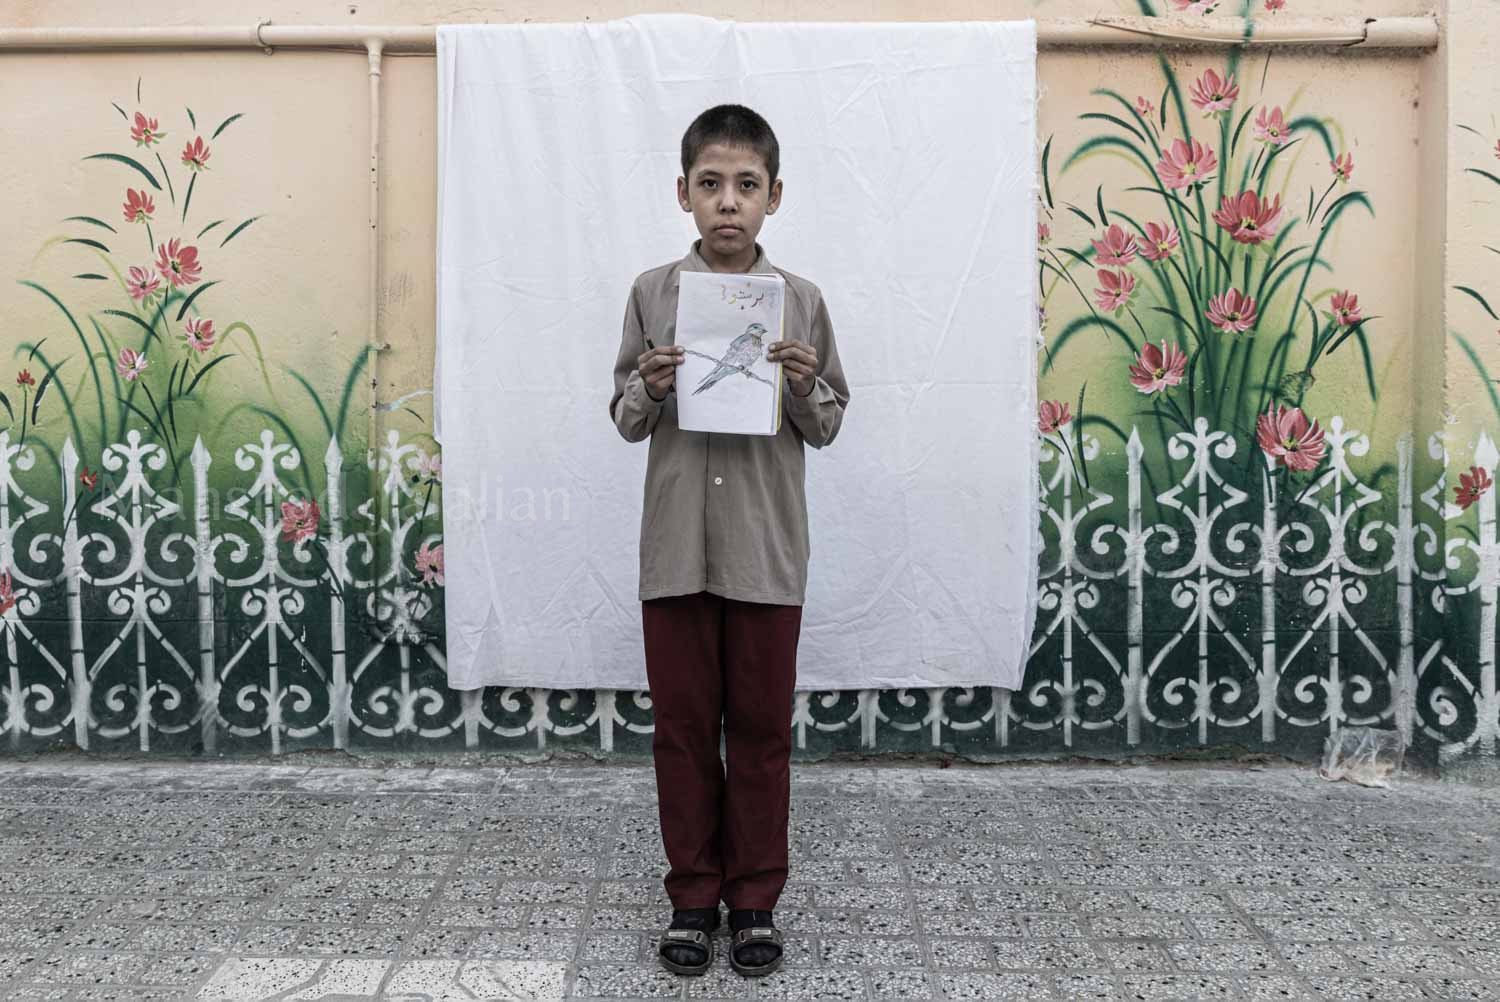 Samir Abdolkhaligh, who is 14 years old moved 3 months ago from Kabul. He studied at grade 6 however he is going to study at grade 4 in Iran.